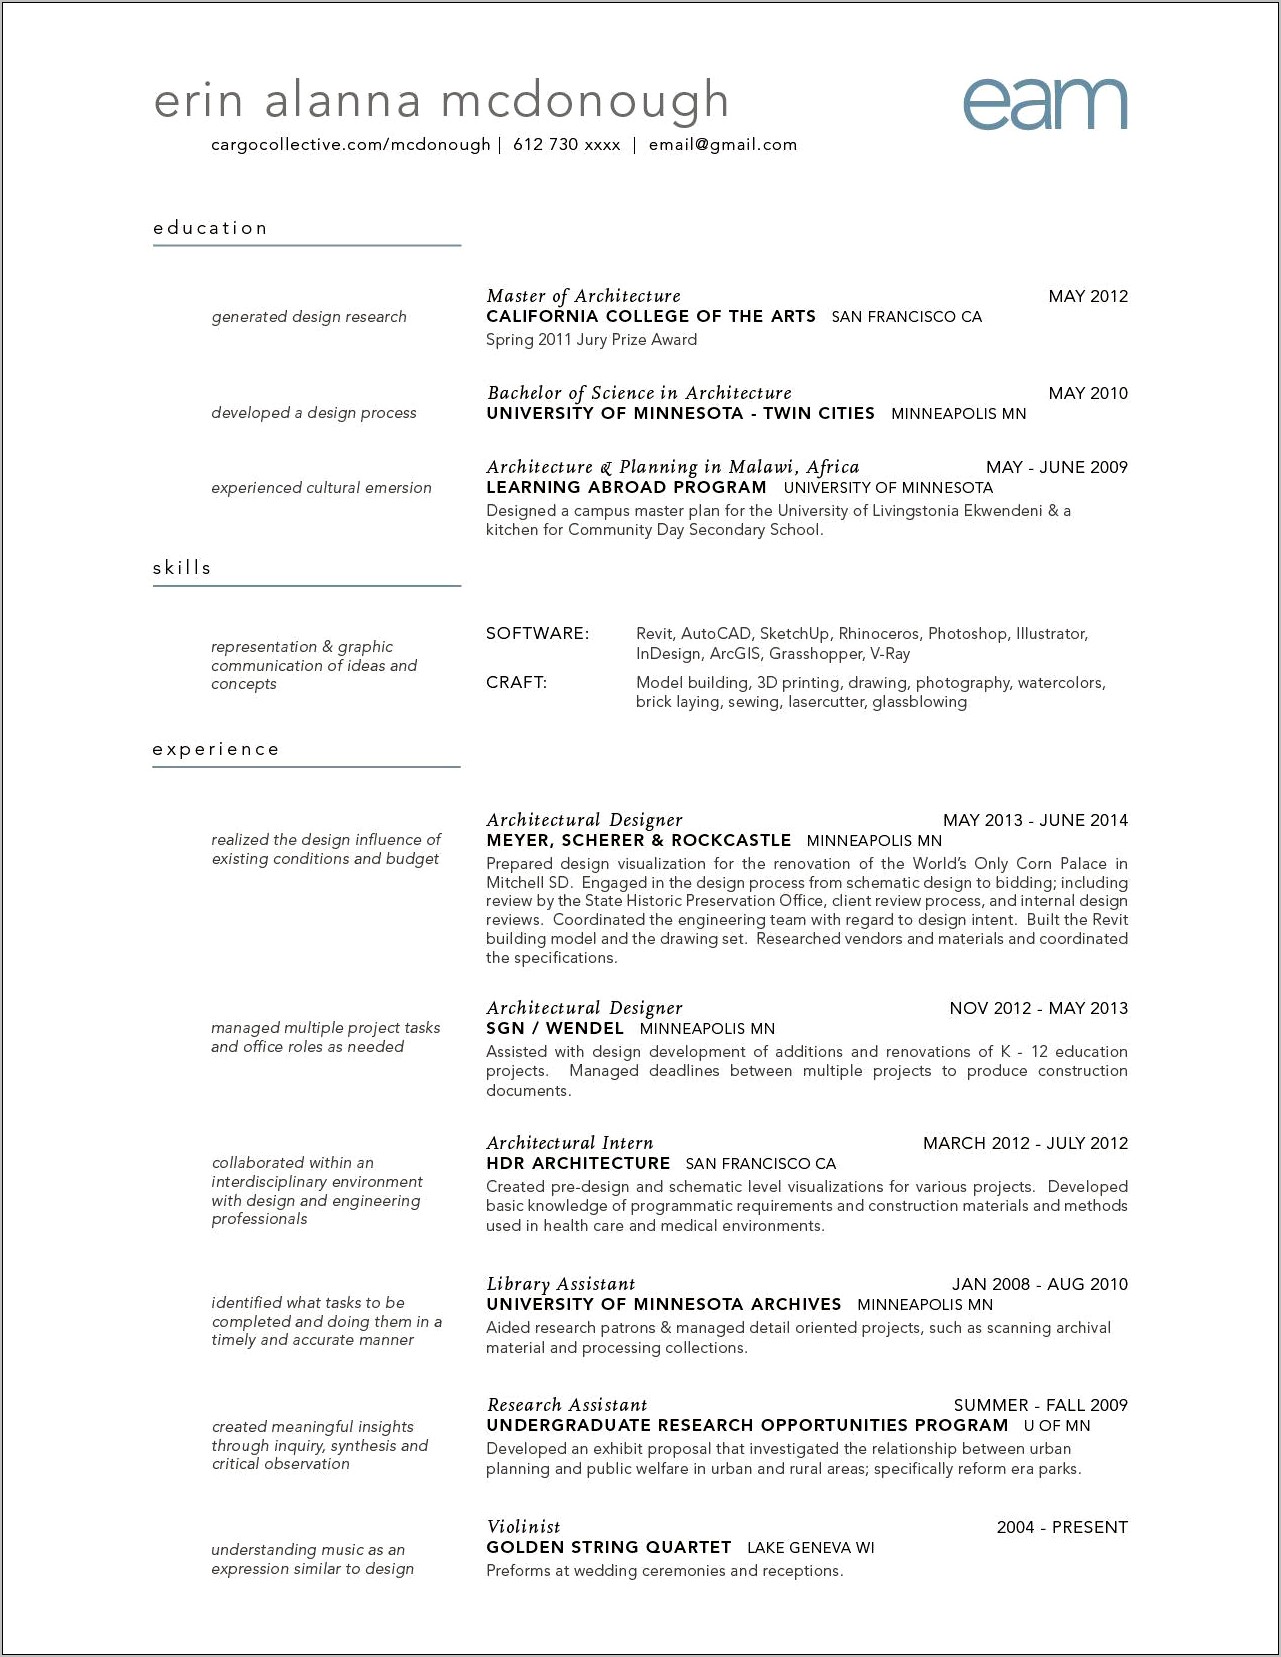 Education Section On Resume Italicise School Or Program